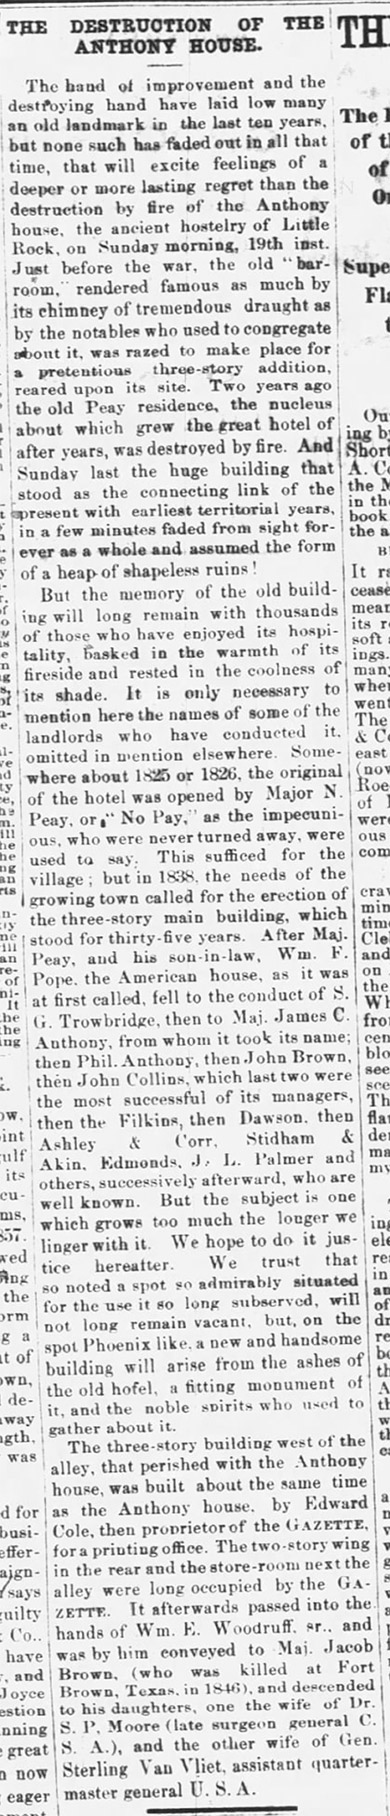 "The destruction of the Anthony House" newspaper clipping